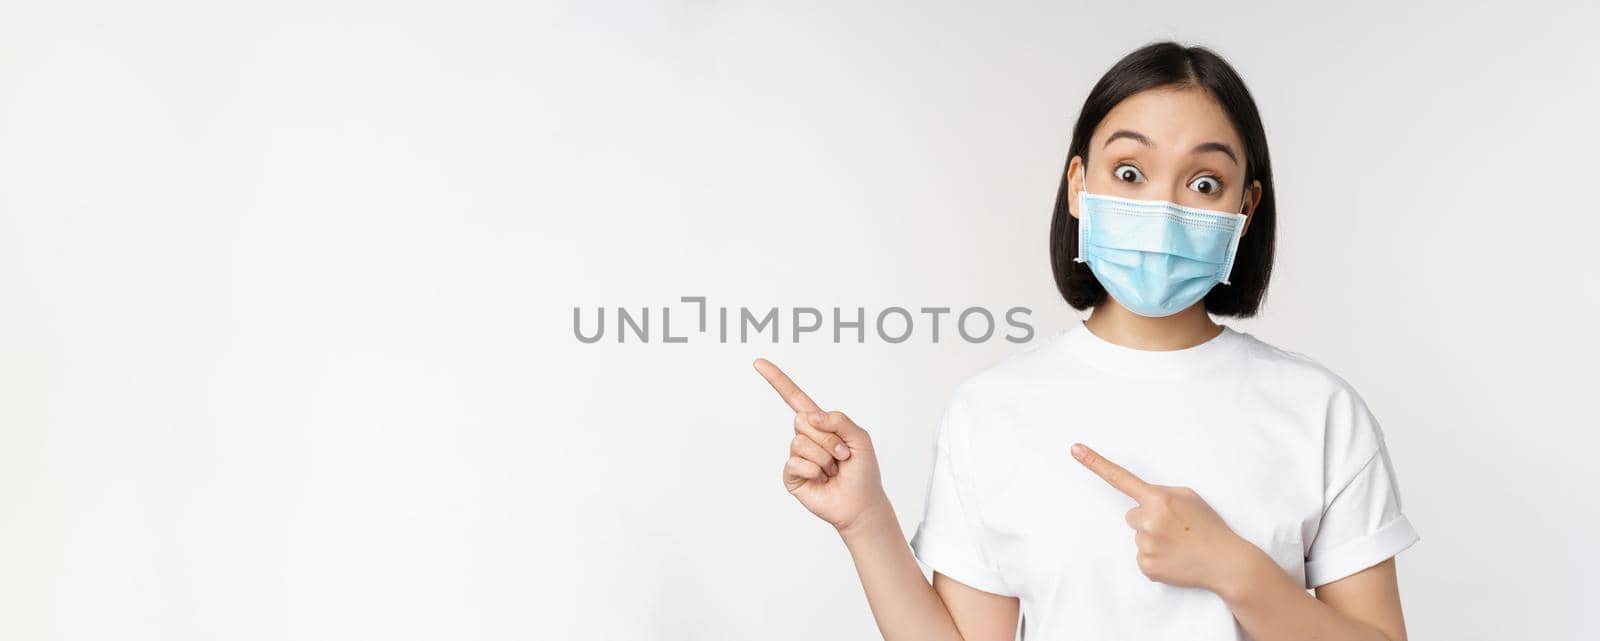 Surprised asian girl in medical mask, pointing fingers left, showing promo offer, raising eyebrows, amazed reaction, standing against white background.